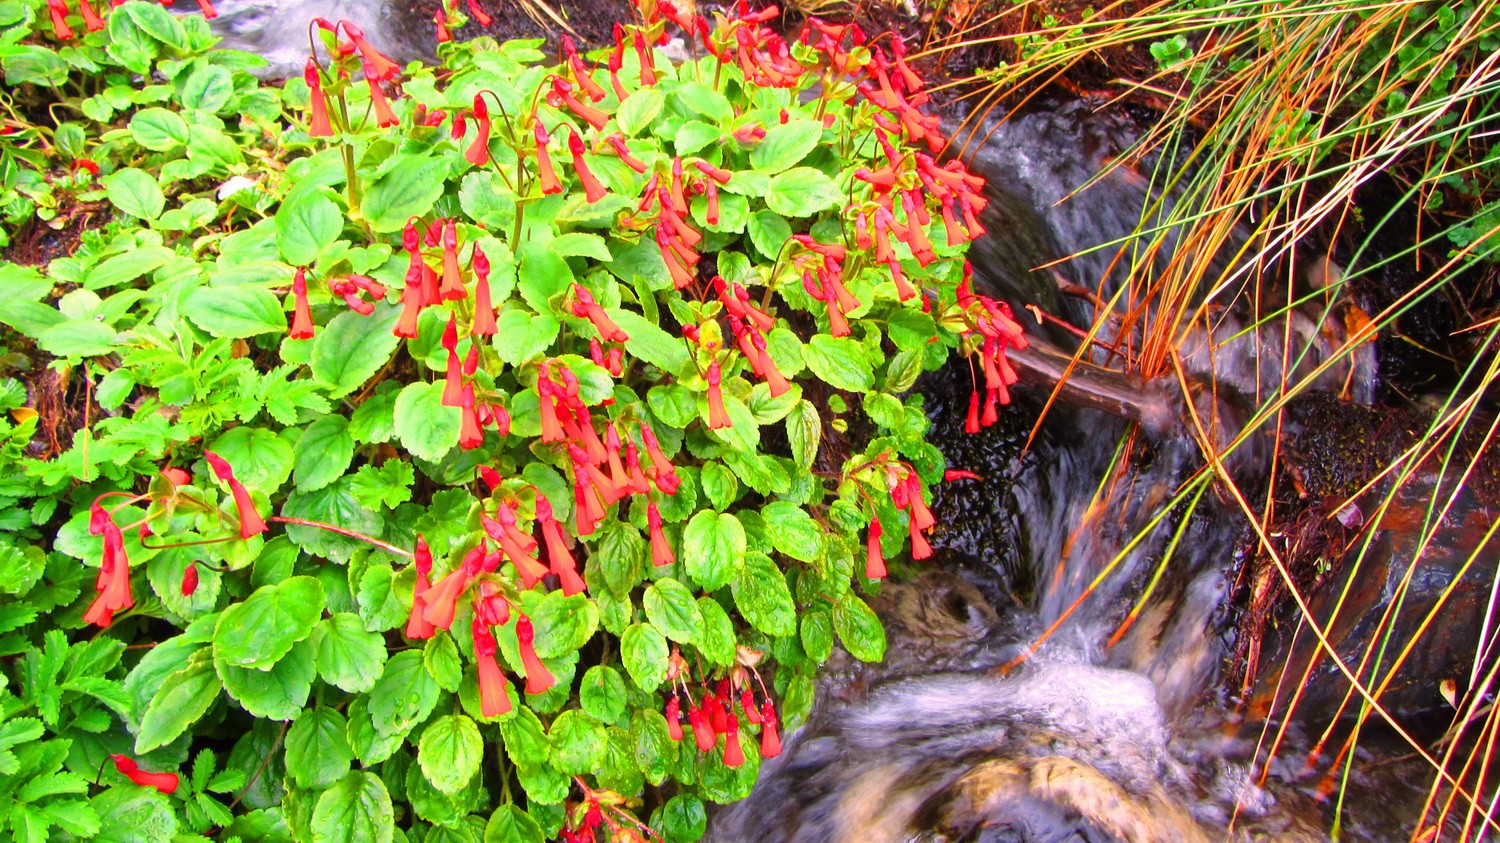 Red flowers in a stream